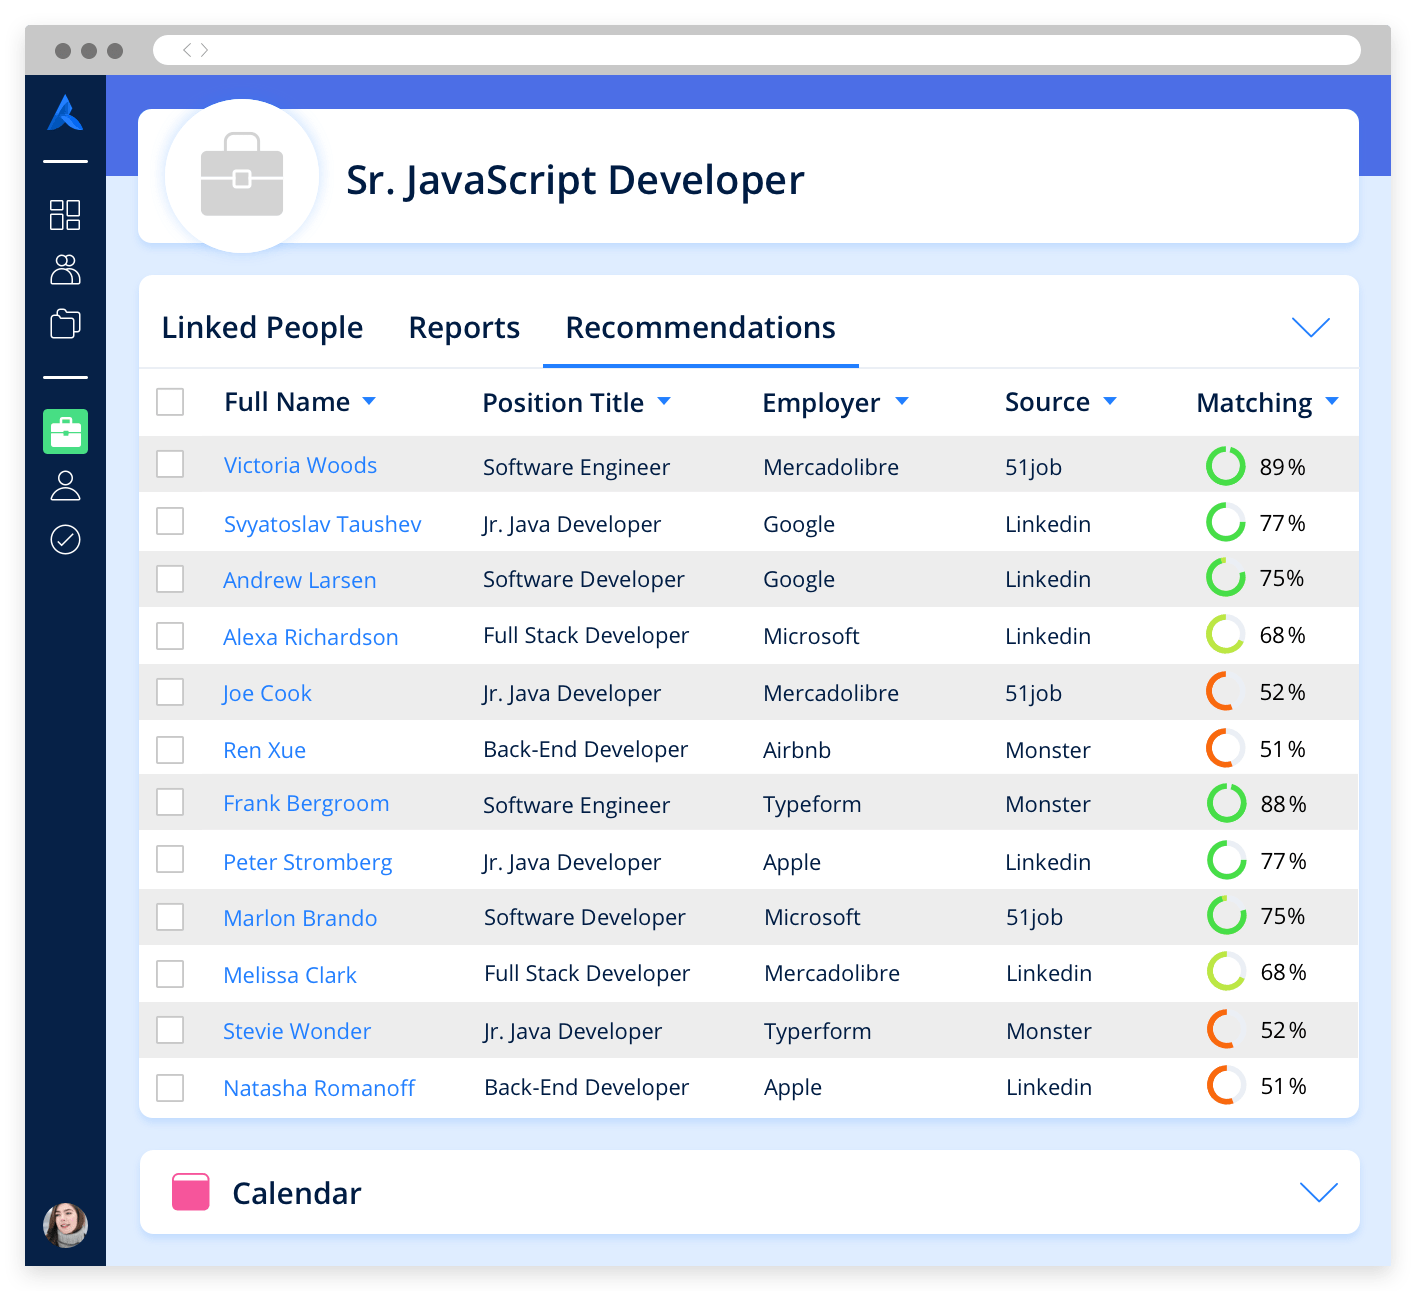 The Avature platform, with an automatic intelligence generated list of best matching candidates to fill a developer role.